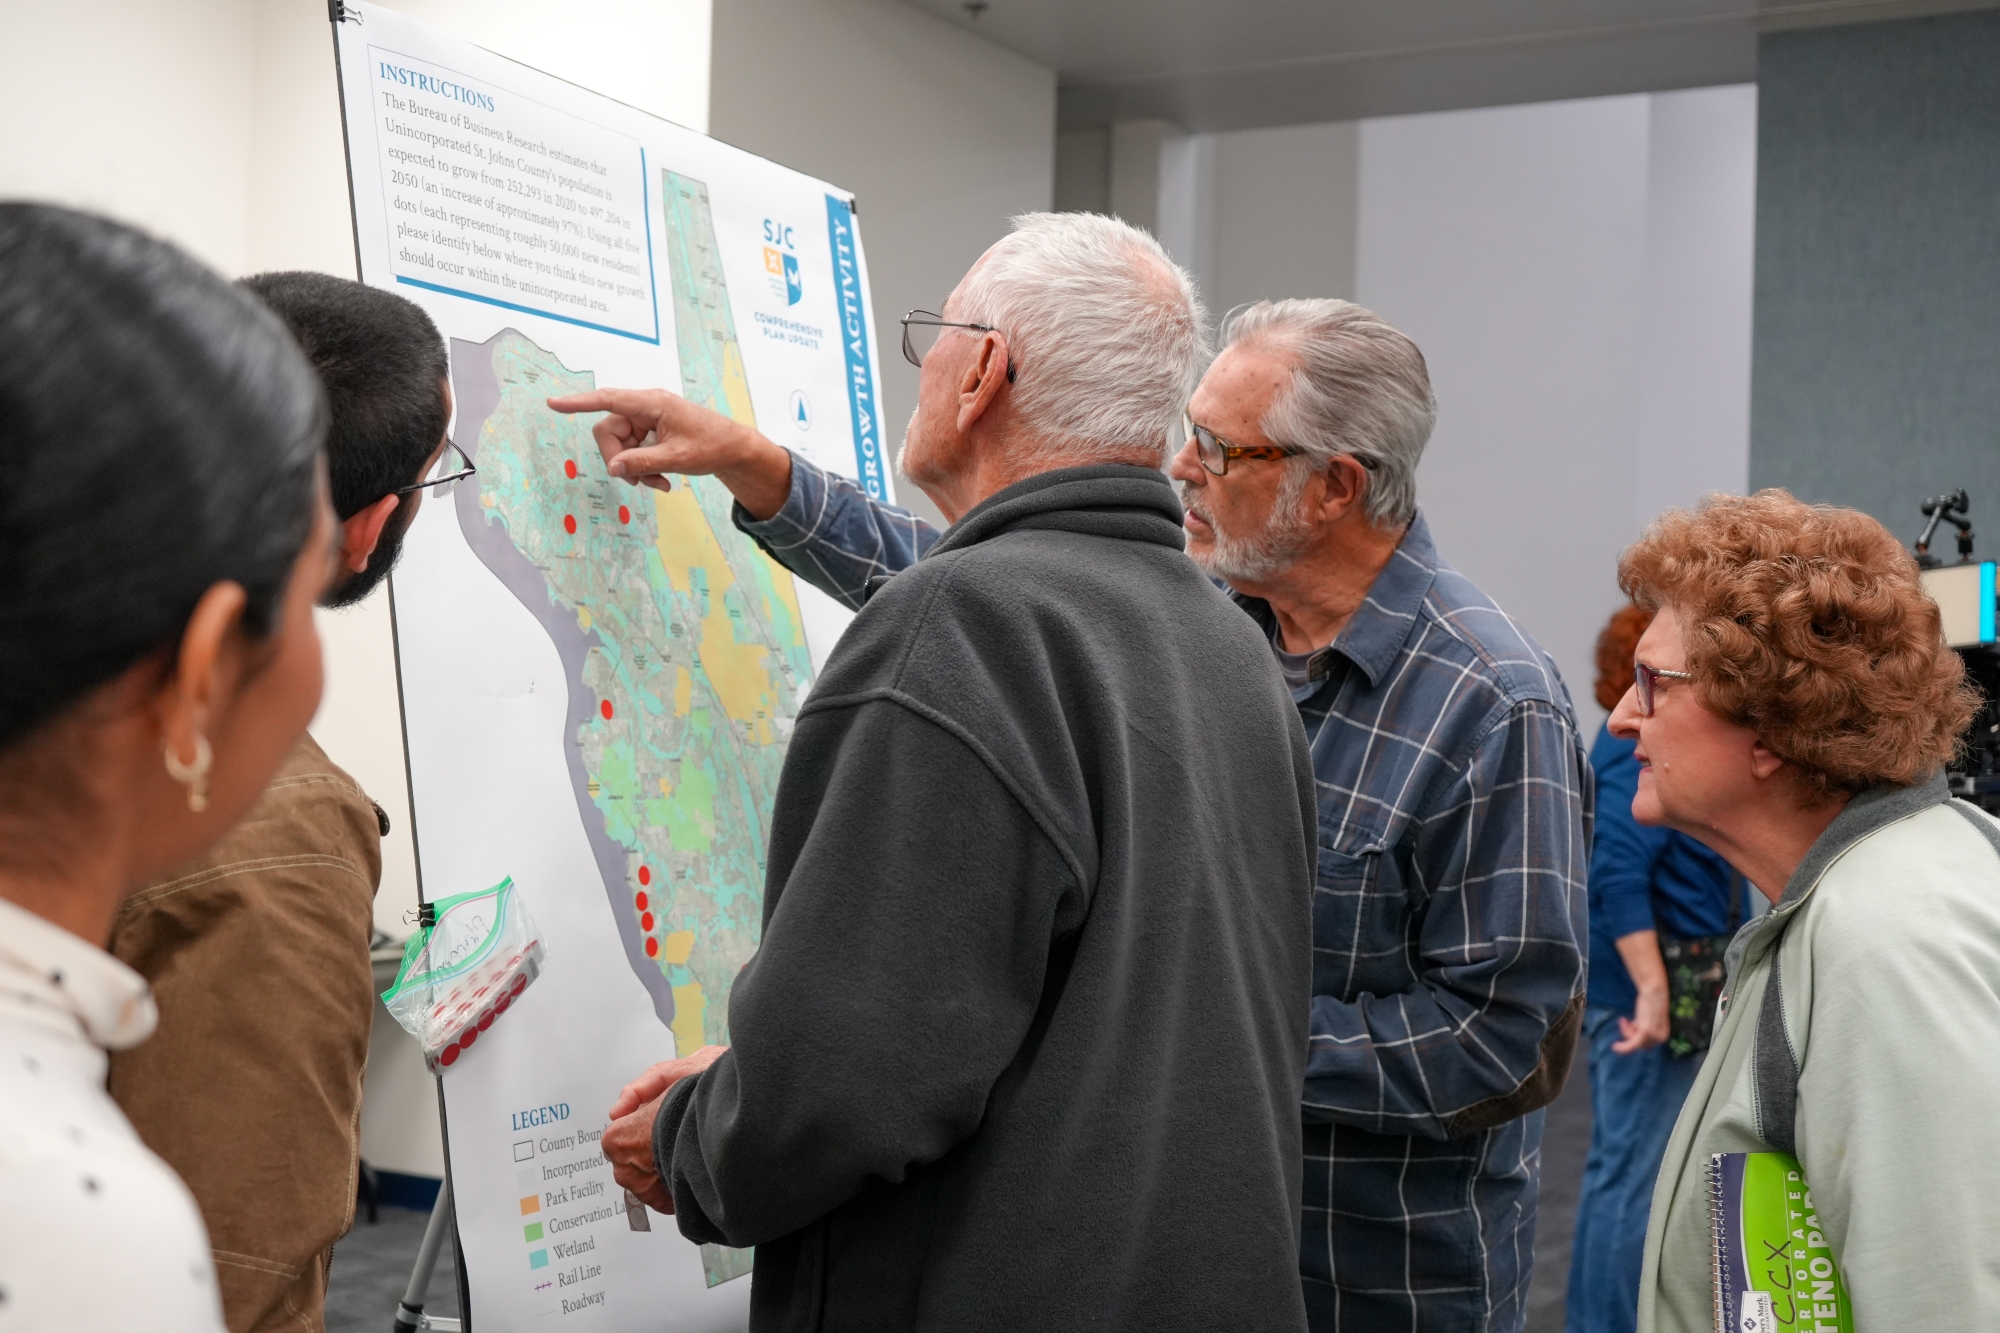 Comprehensive Plan Update Open House on July 23